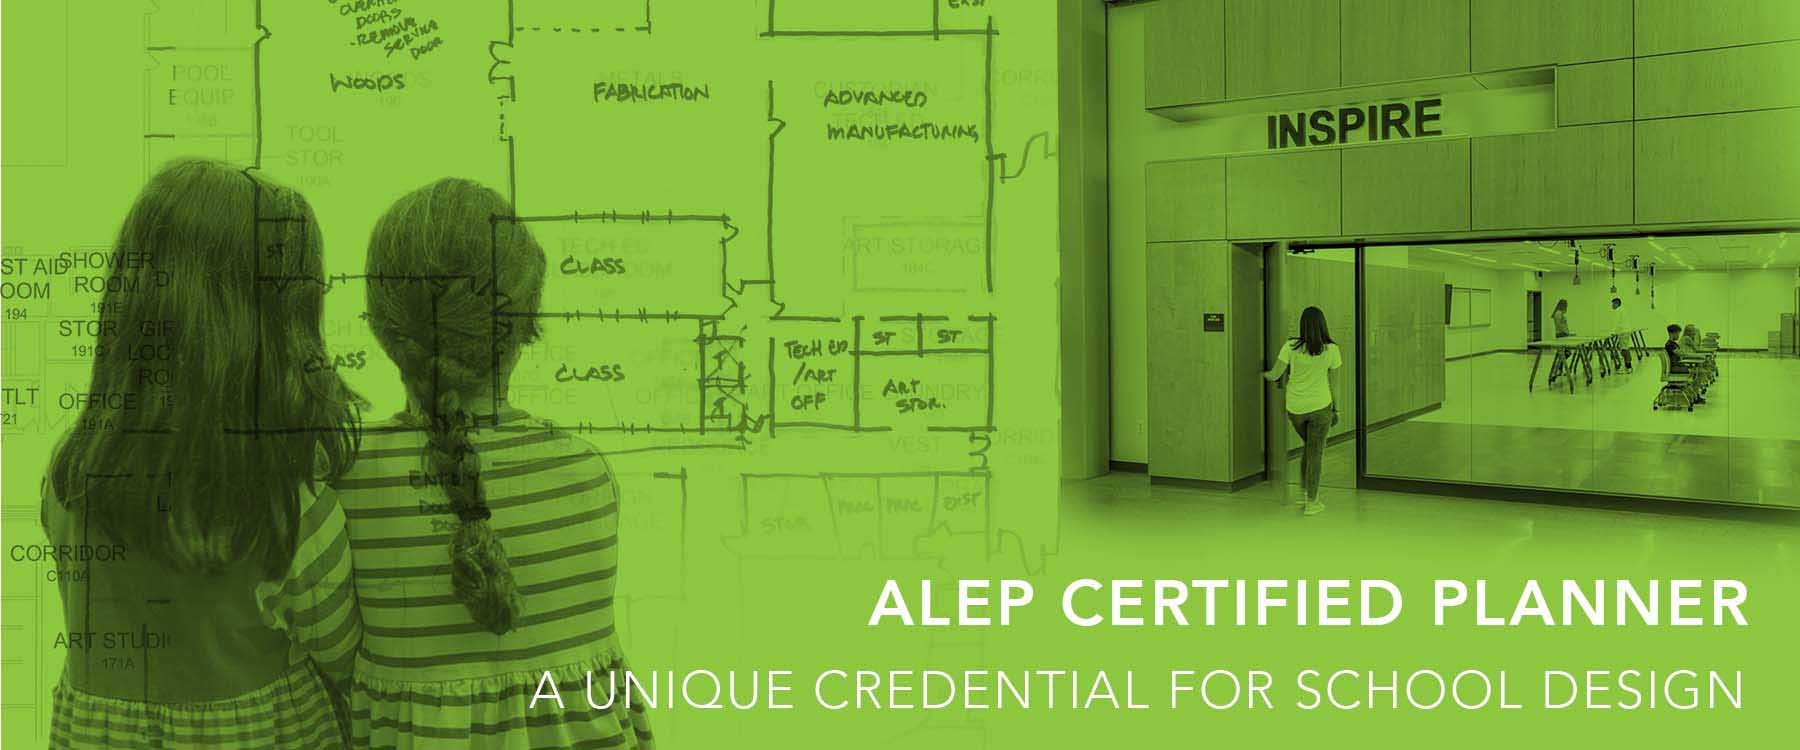 An ALEP Certified School Planner provides many advantages over other architects, as summarized by the architects and interior designers of the PRA School Design Studio.